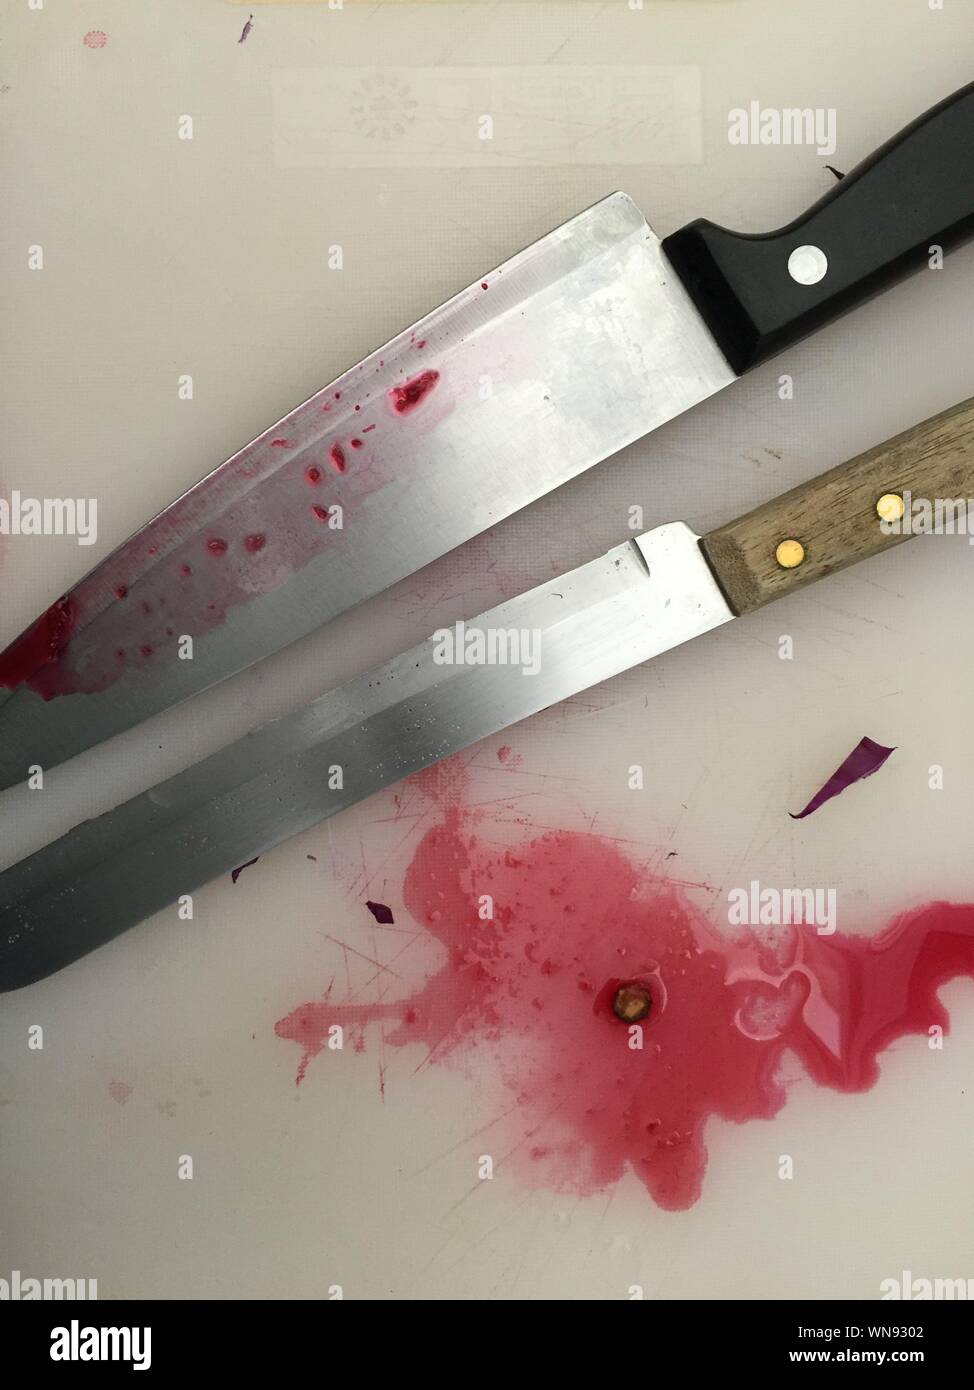 Directly Above View Of Stained Kitchen Knives Stock Photo